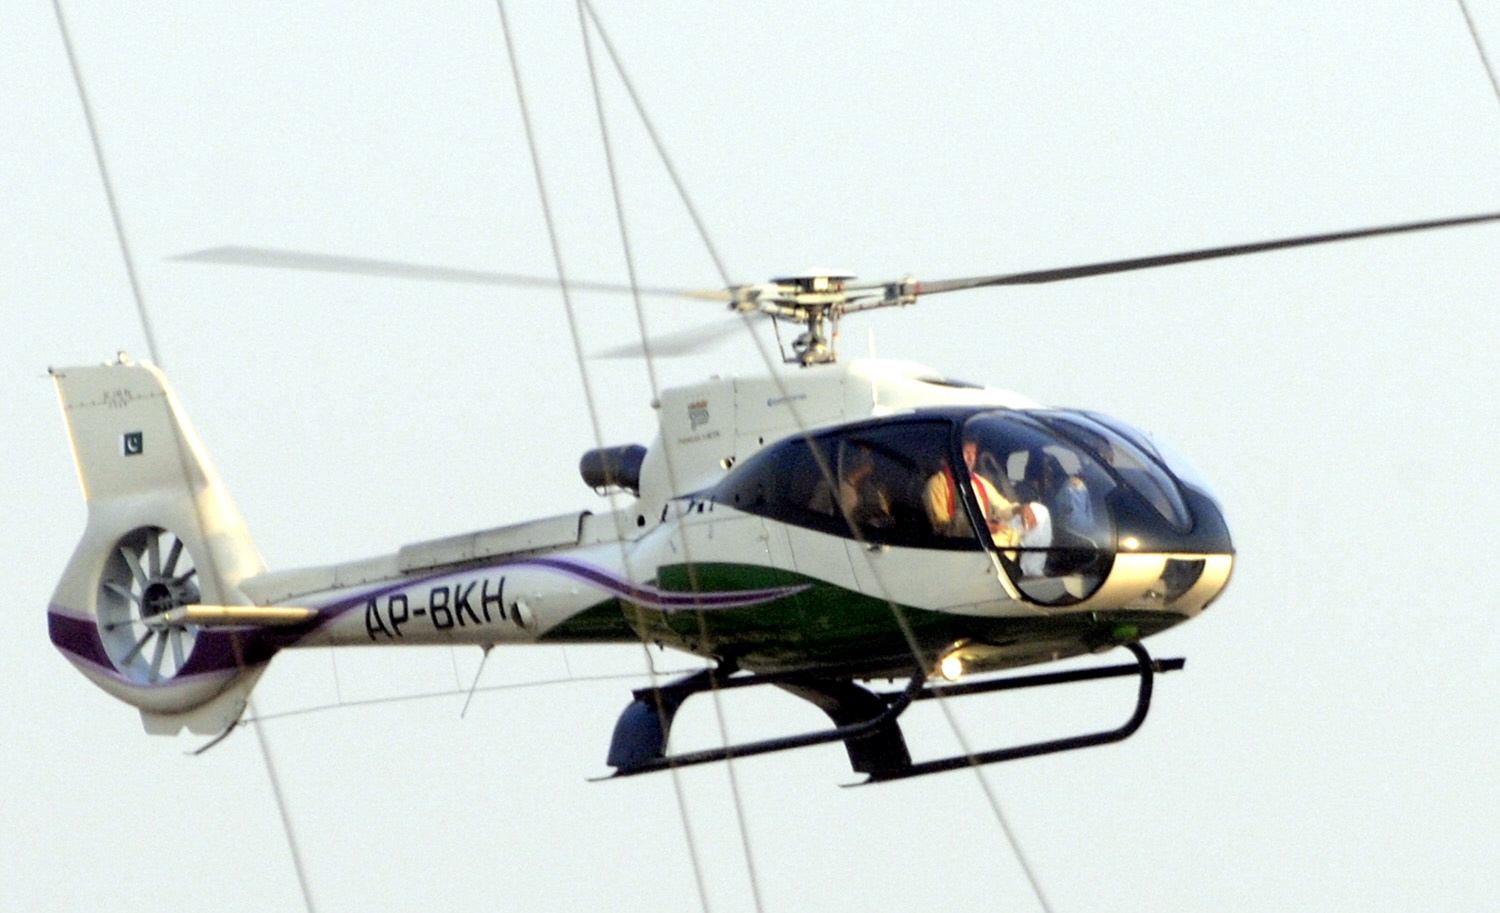 Imran Khan helicopters